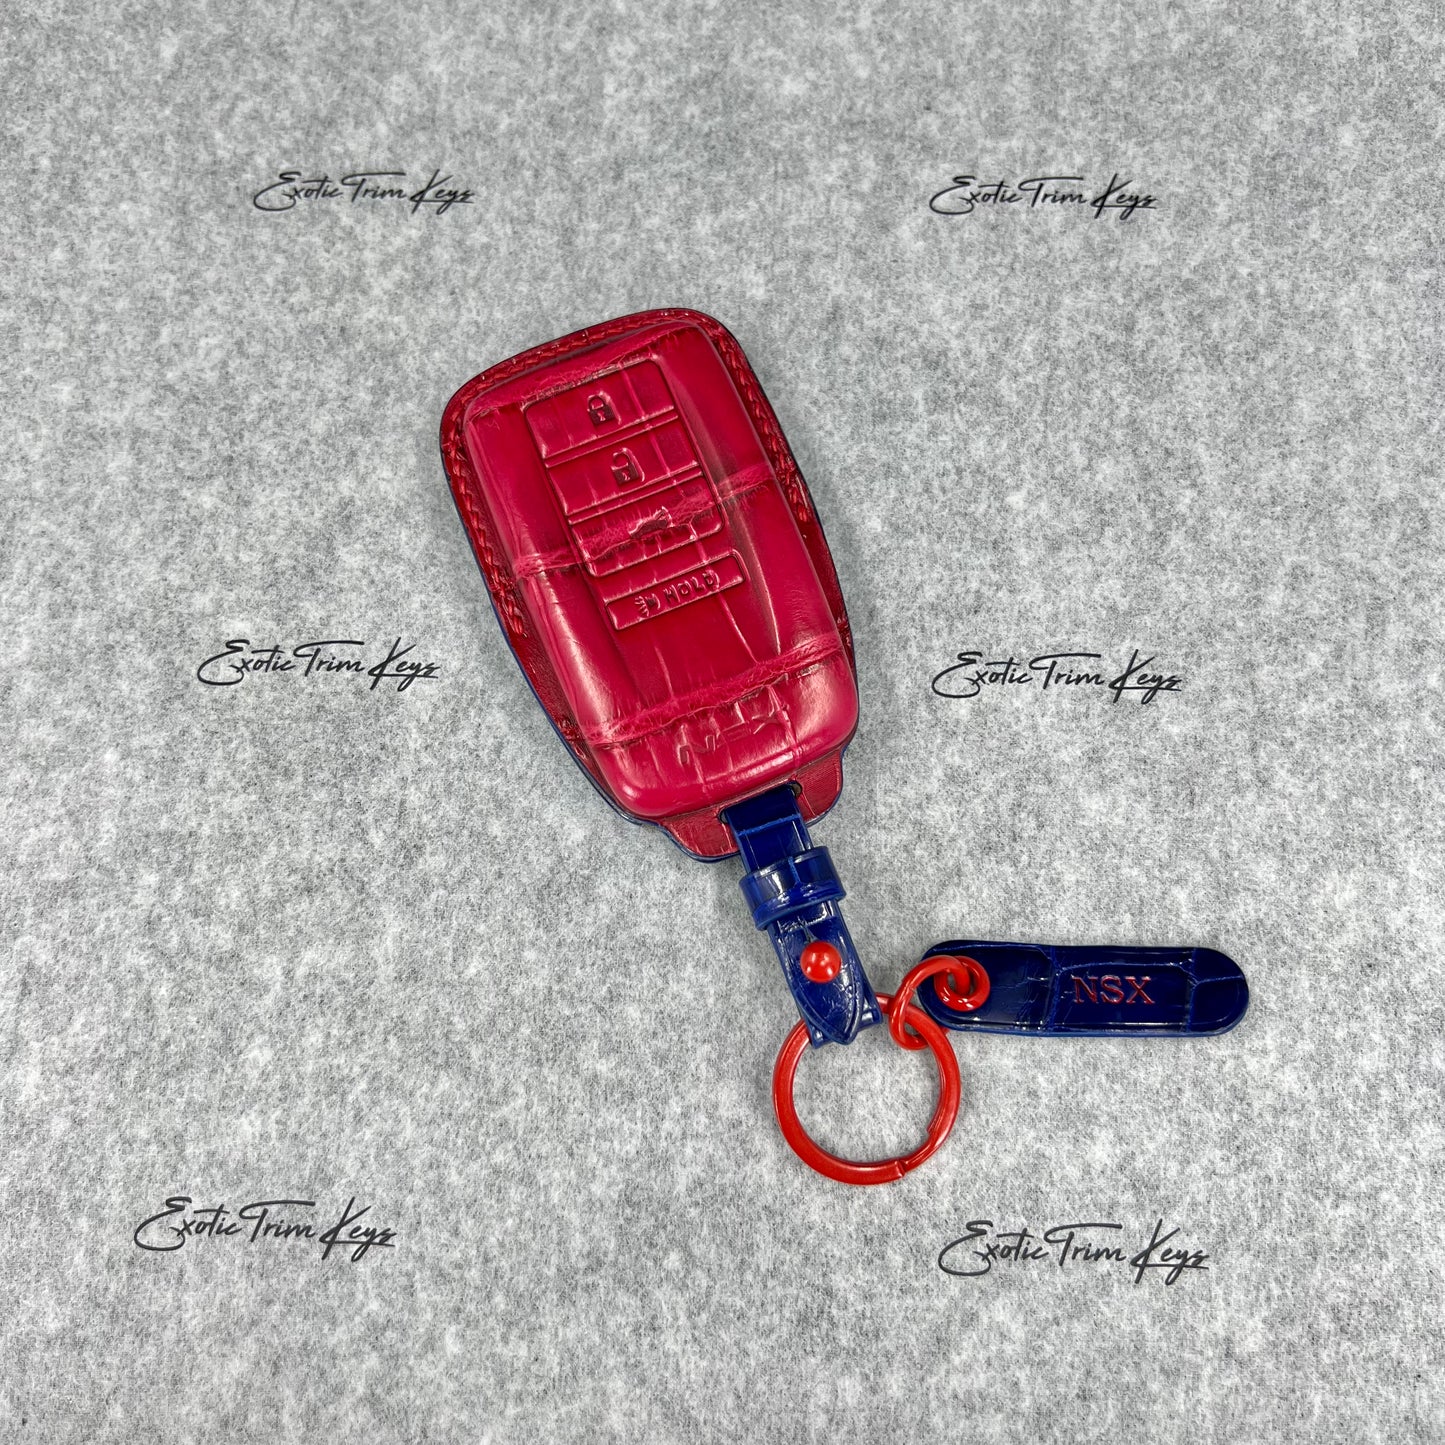 Acura NSX Key Cover - Blue & Red Crocodile Leather / Red Stitching - IN STOCK